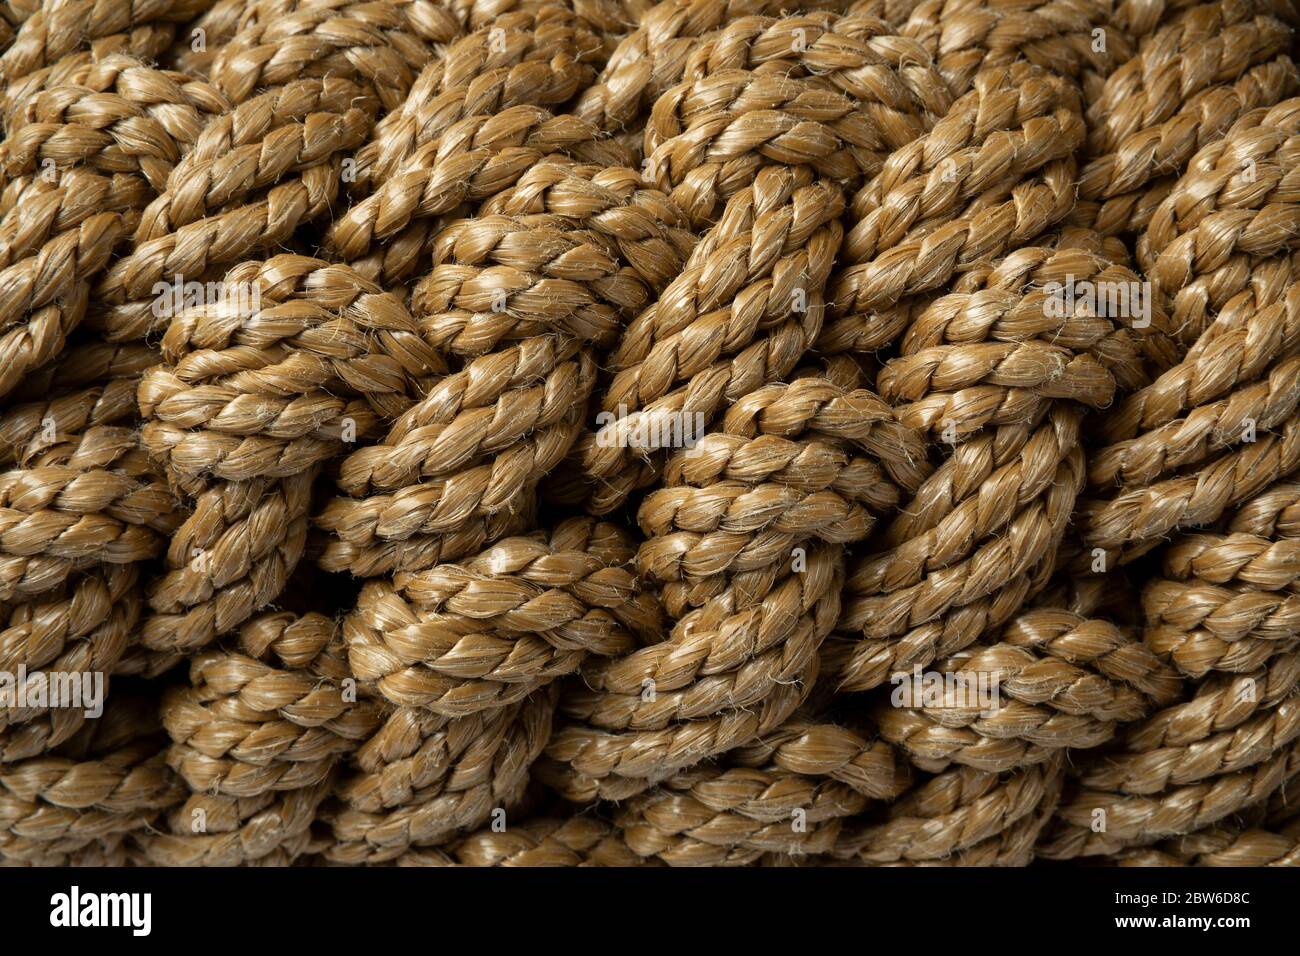 New handmade knotted rope close up full frame Stock Photo